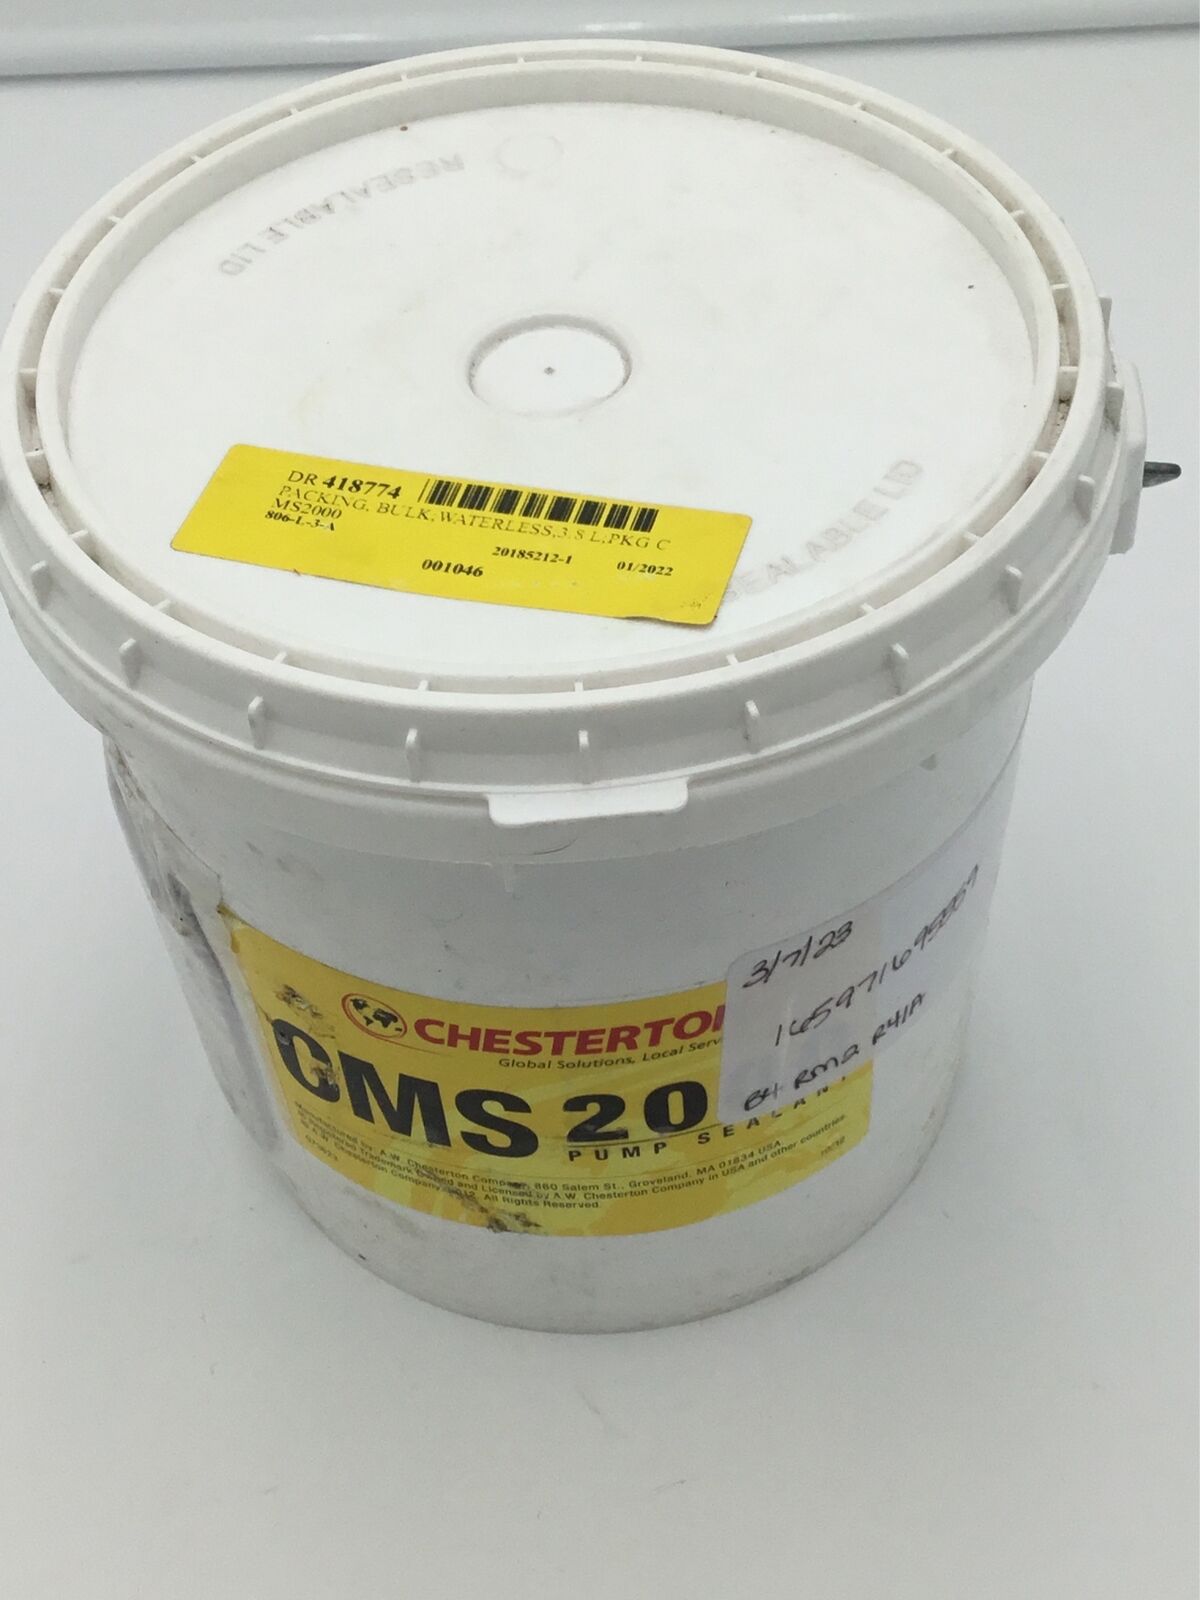 Chesterton White Injectable Sealant Model CMS 2000 3.8 L, 001046